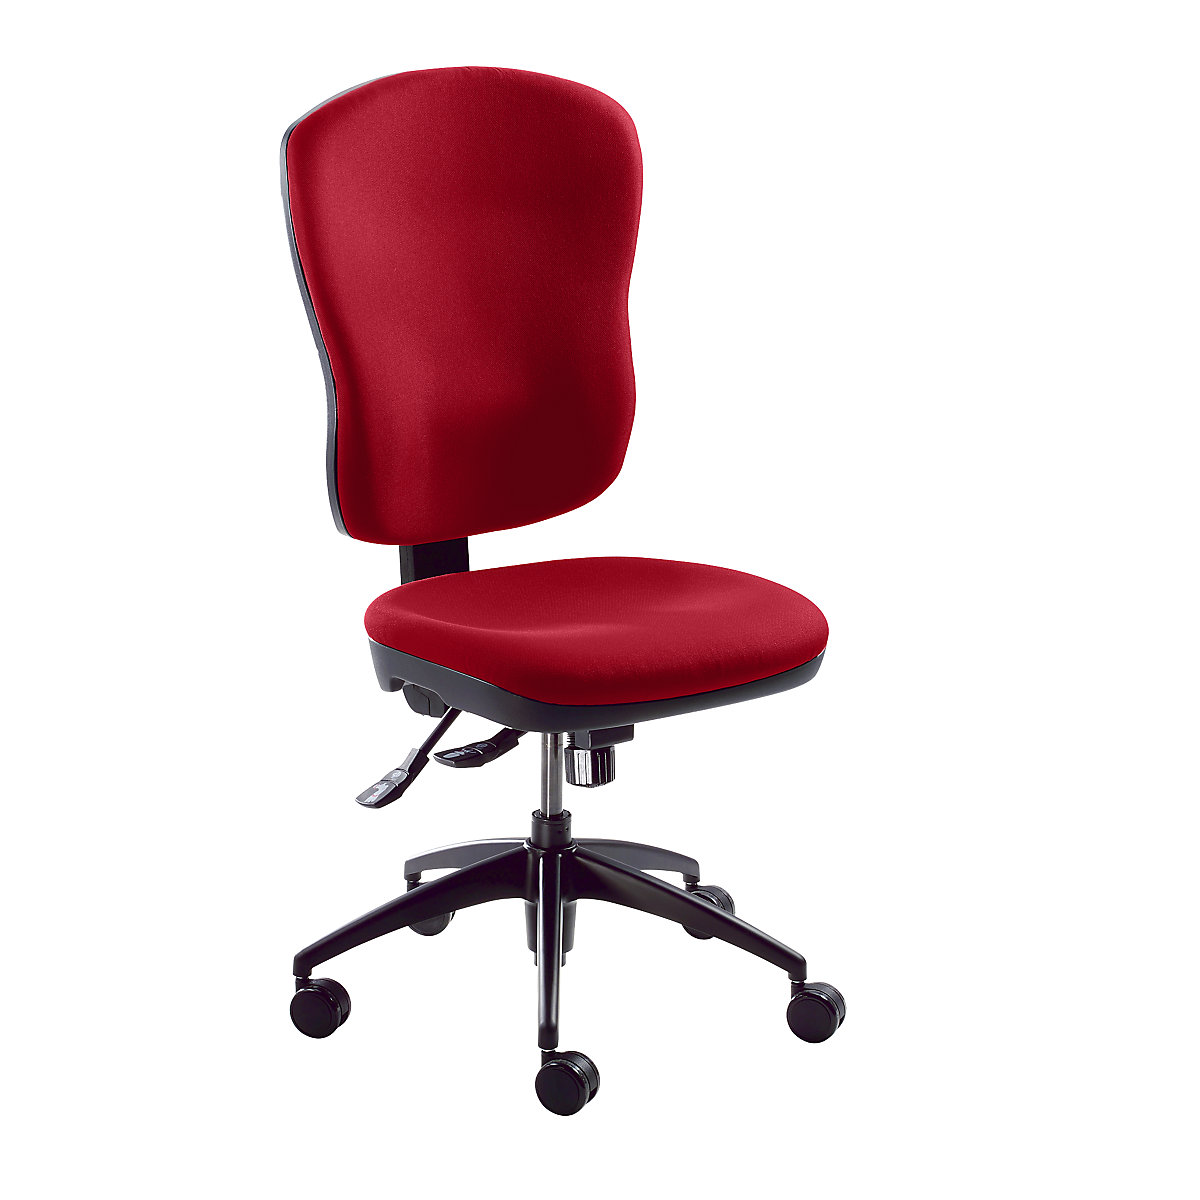 Operator swivel chair, back rest height 600 mm – eurokraft pro, point synchronous mechanism, contoured seat, without arm rests, bordeaux covering-3